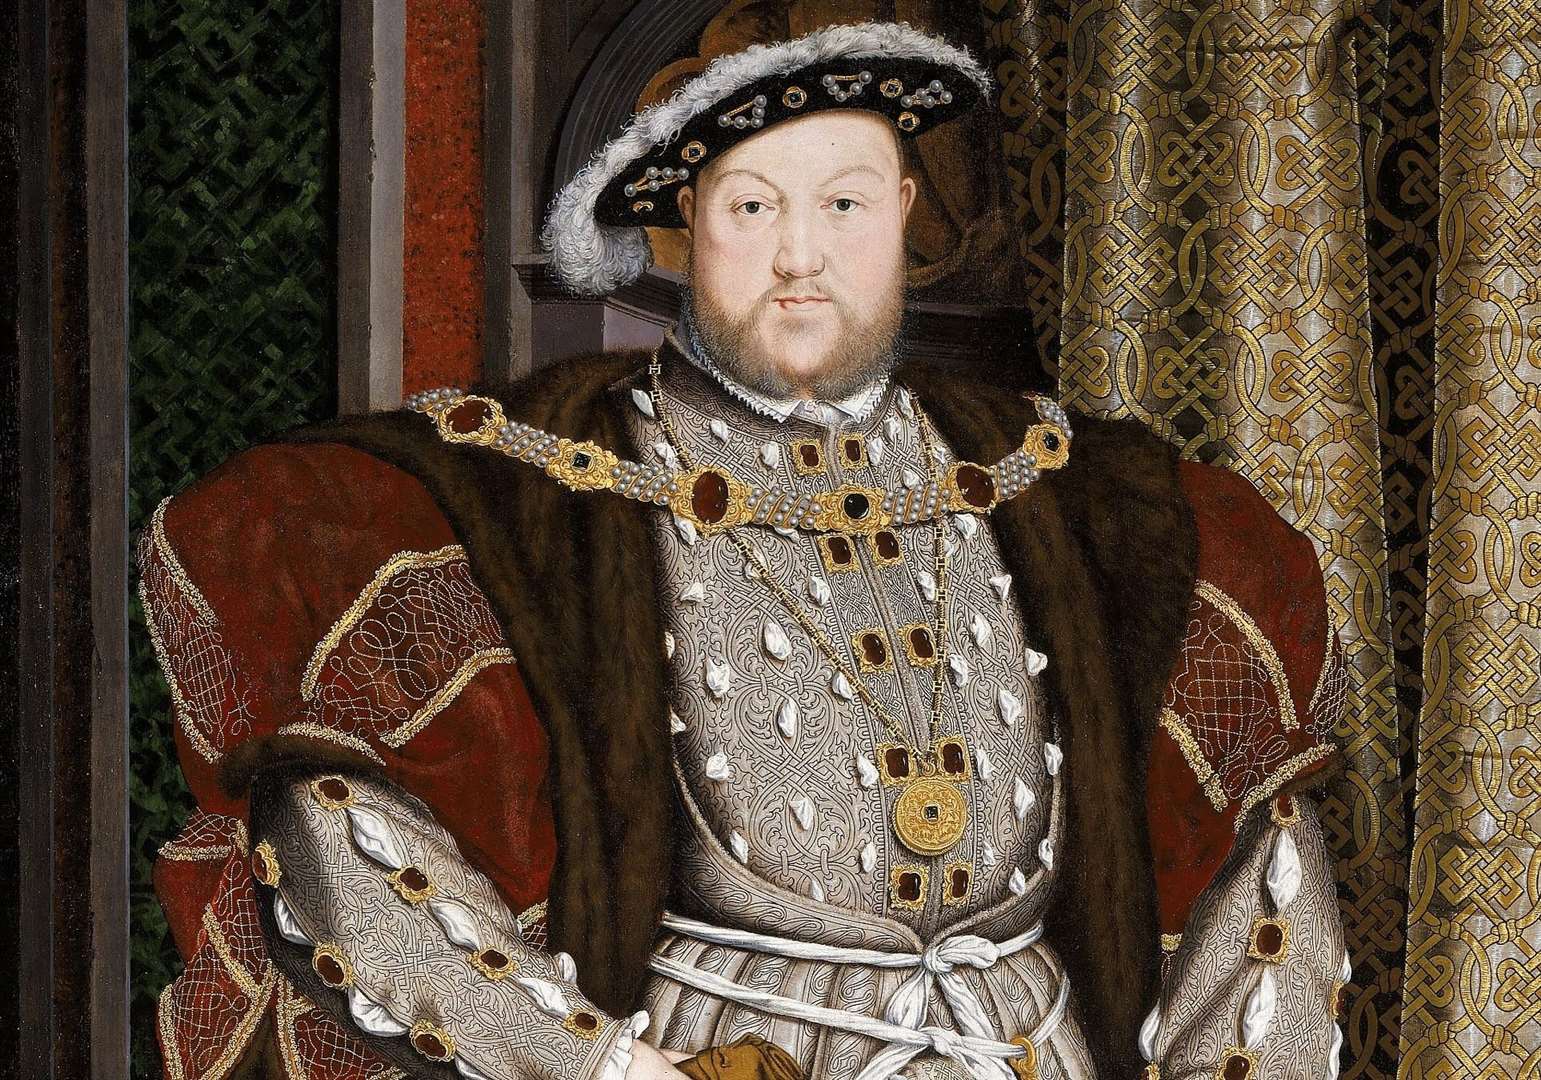 Henry VIII - did he or did he not tax all beards? The jury is still out...